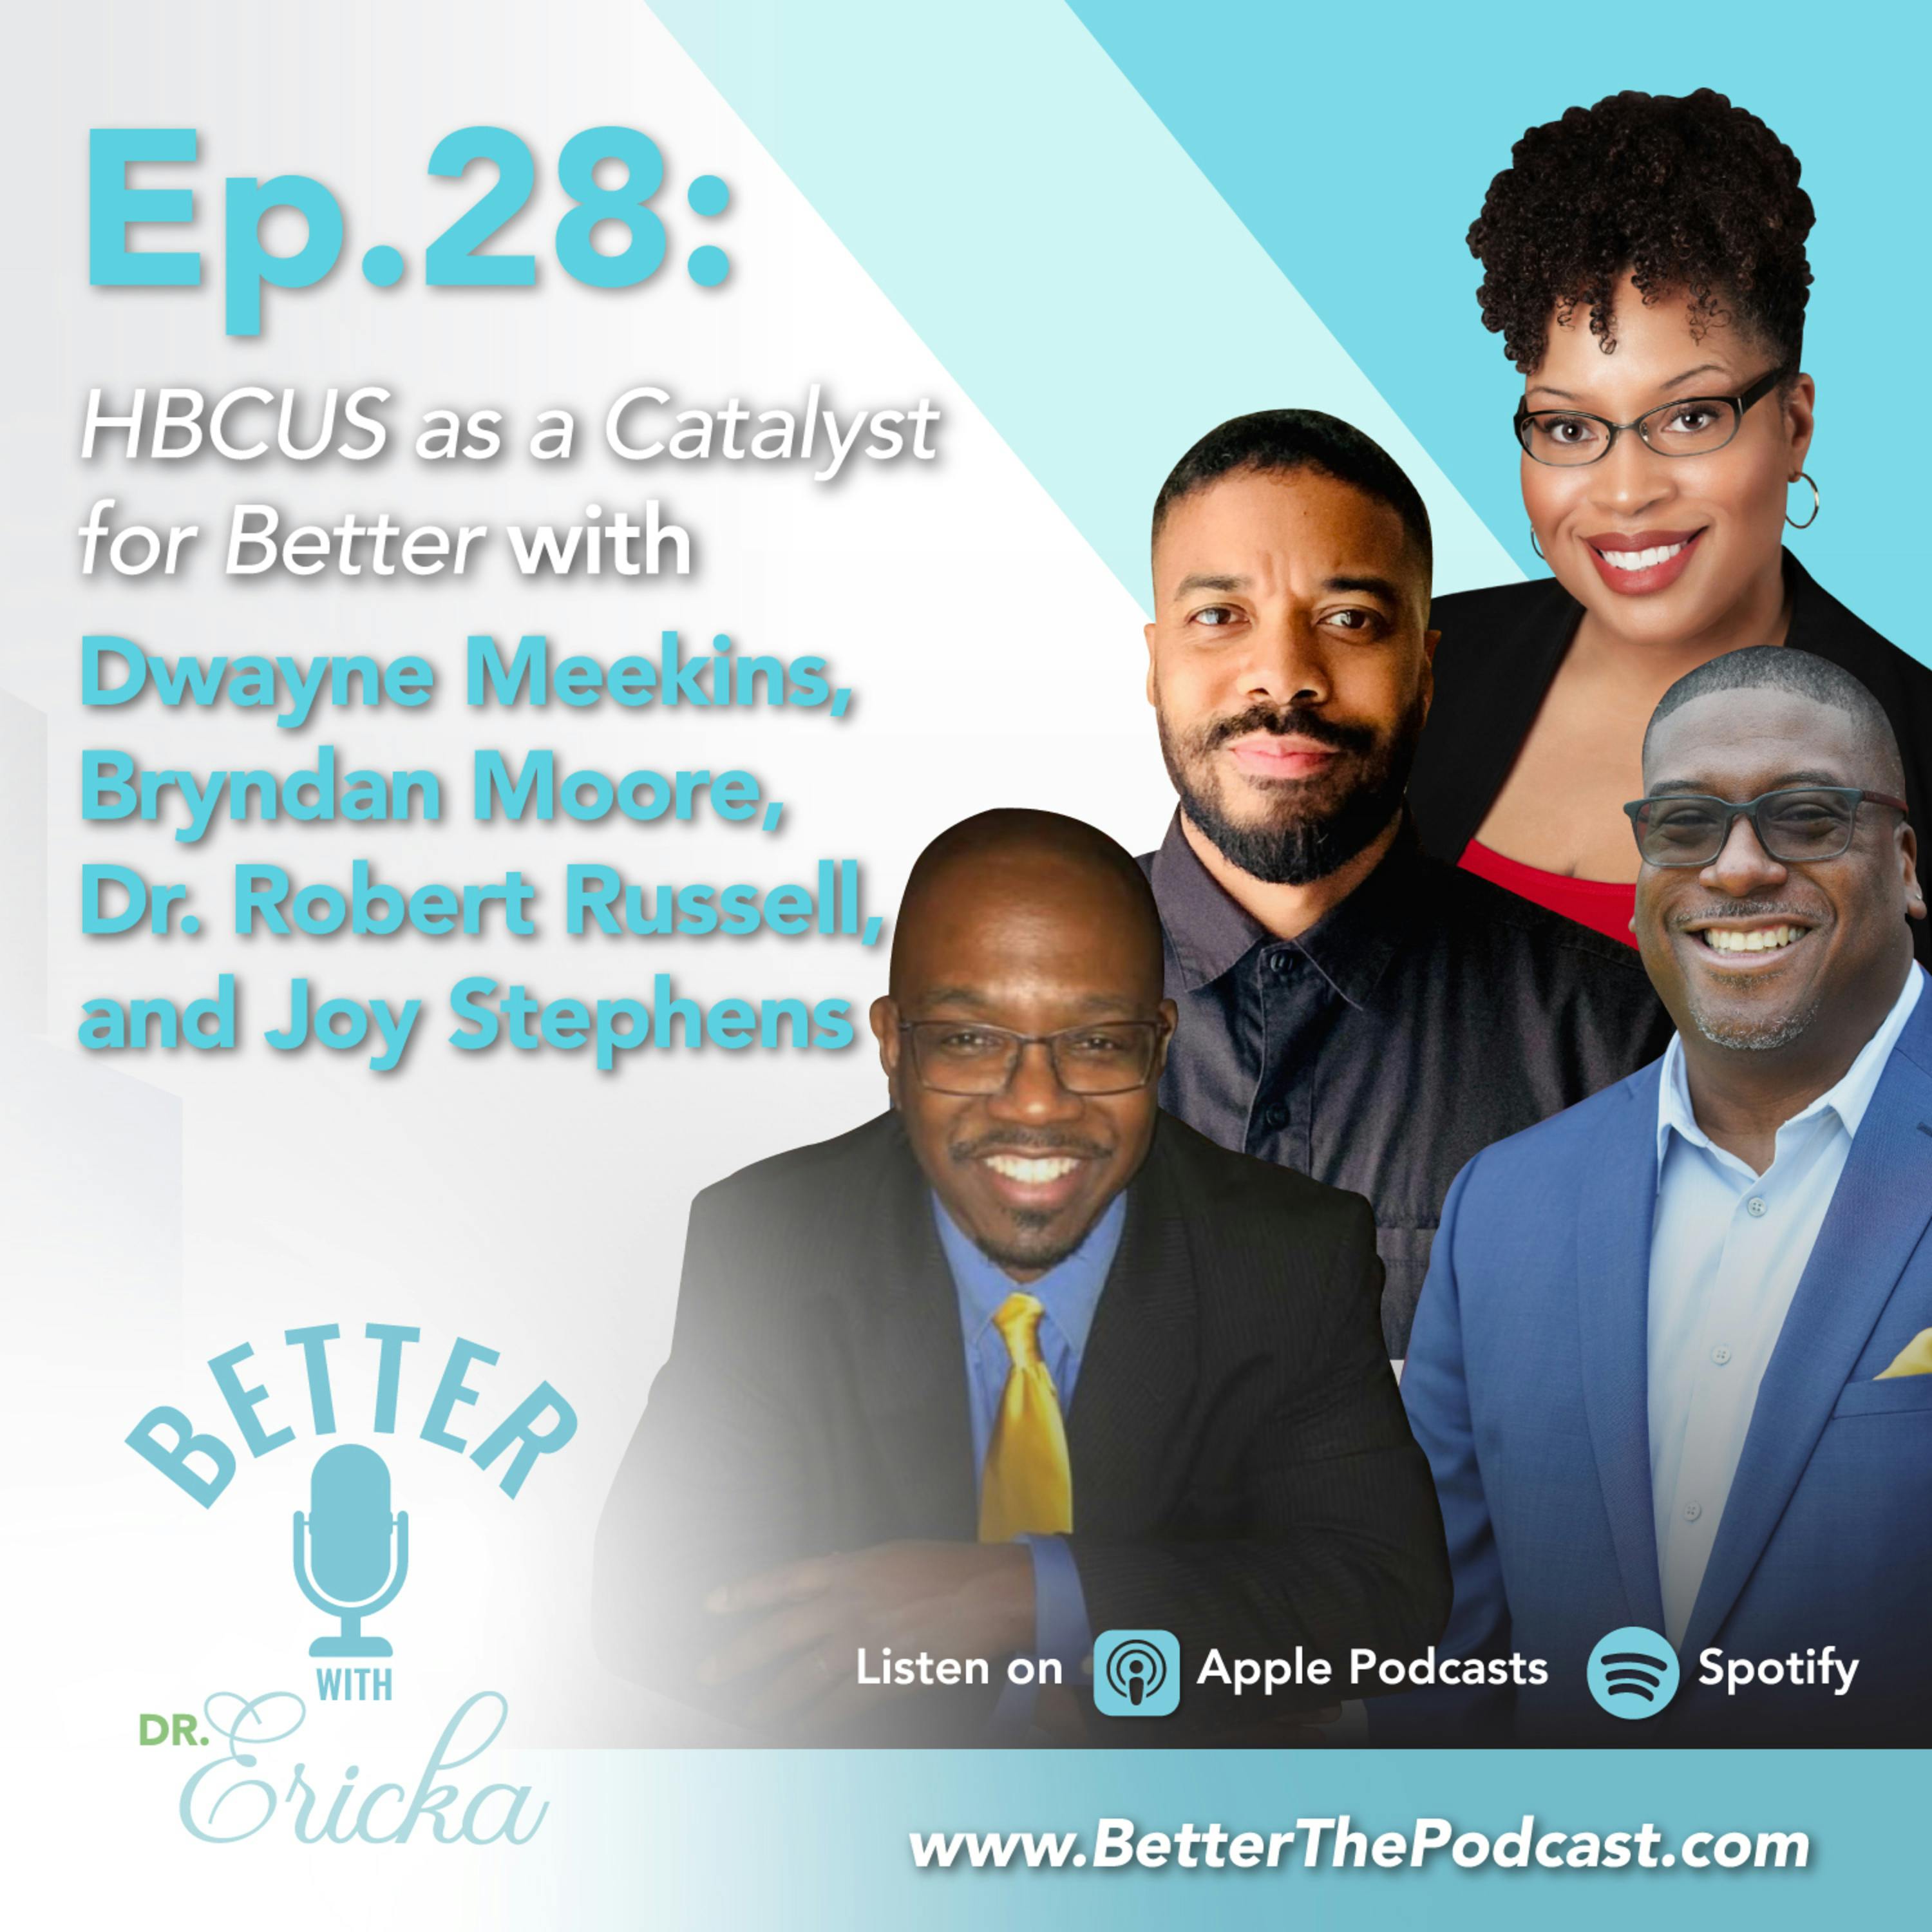 Getting Better with HBCUs with Dwayne Meekins, Bryndan Moore, Dr. Robert Russell, and Joy Stephens